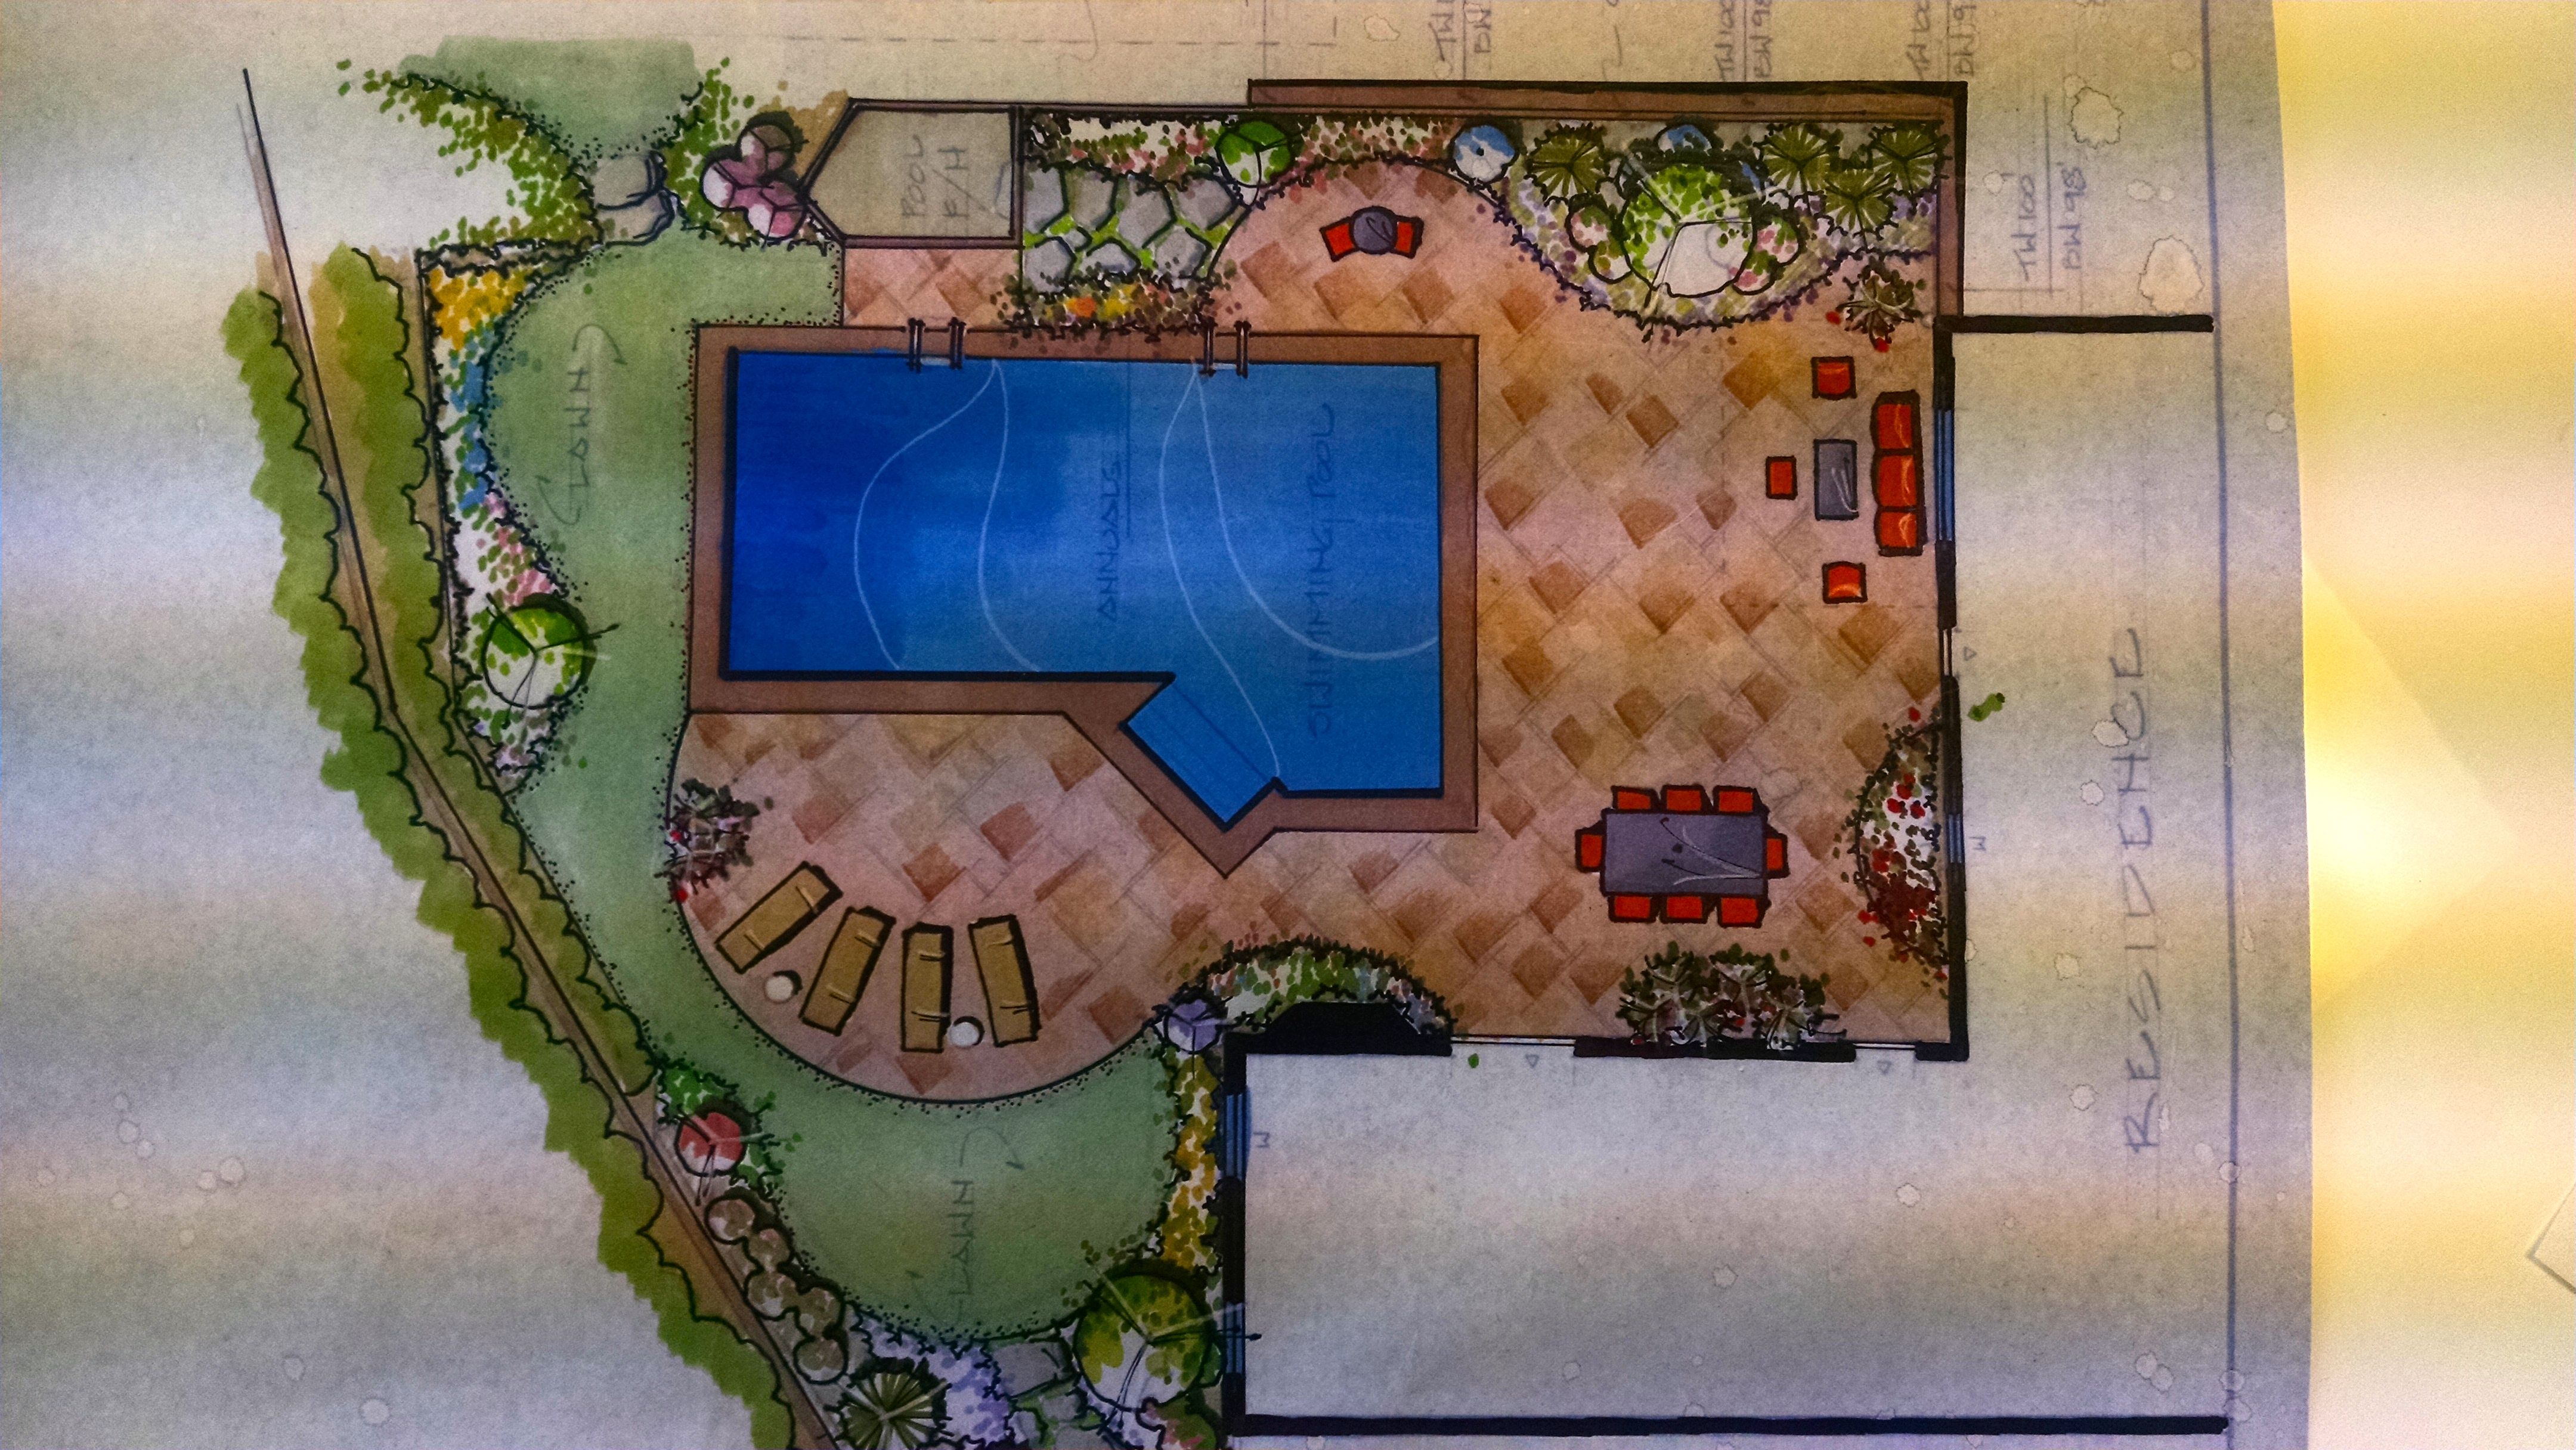 Deck and Patio’s Project Design Rendering: